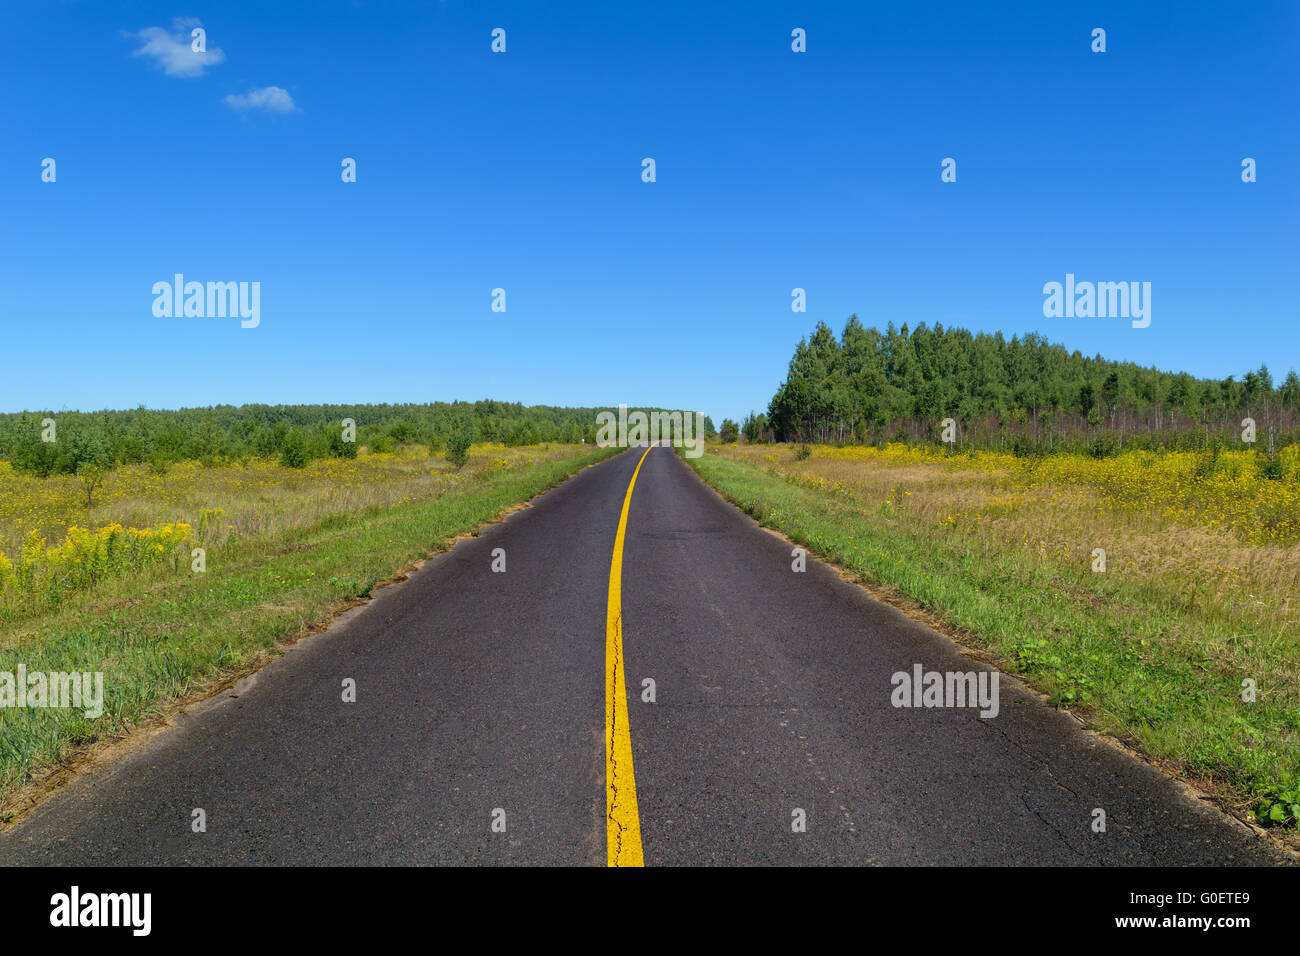 Highway with one line of solid yellow road marking Stock Photo